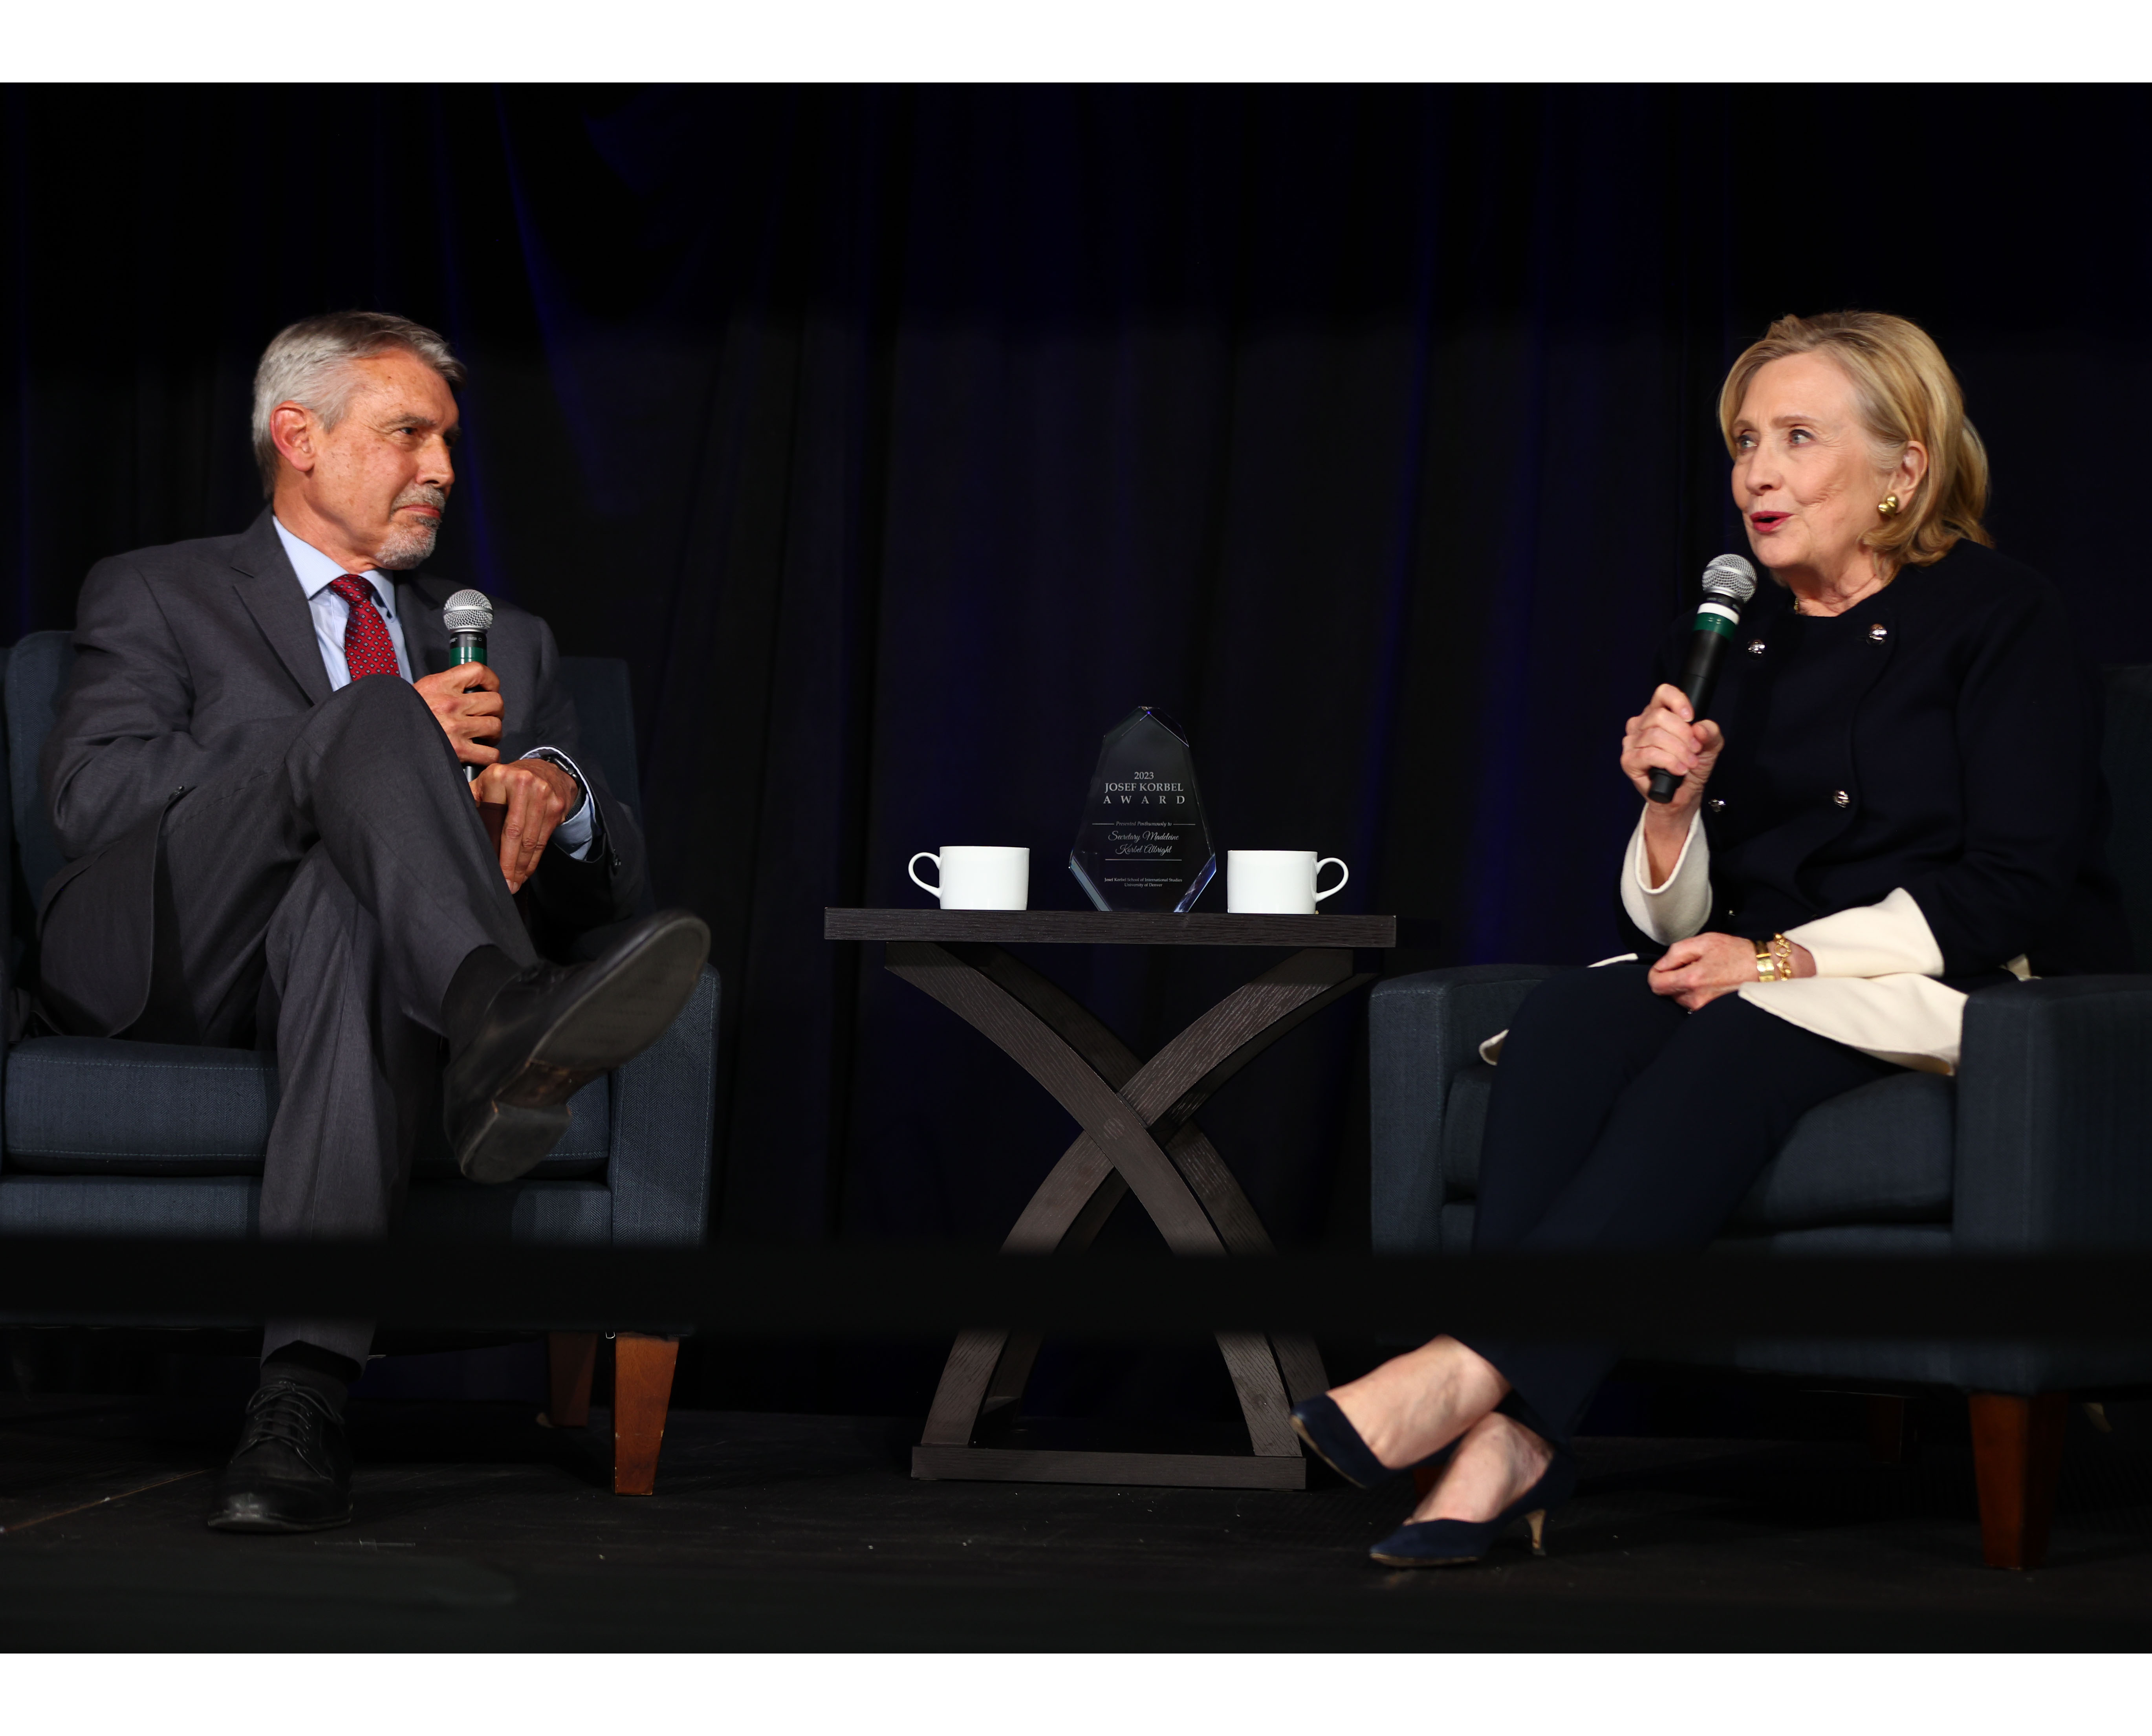 Hillary Clinton speaks with Fritz Mayer on stage.